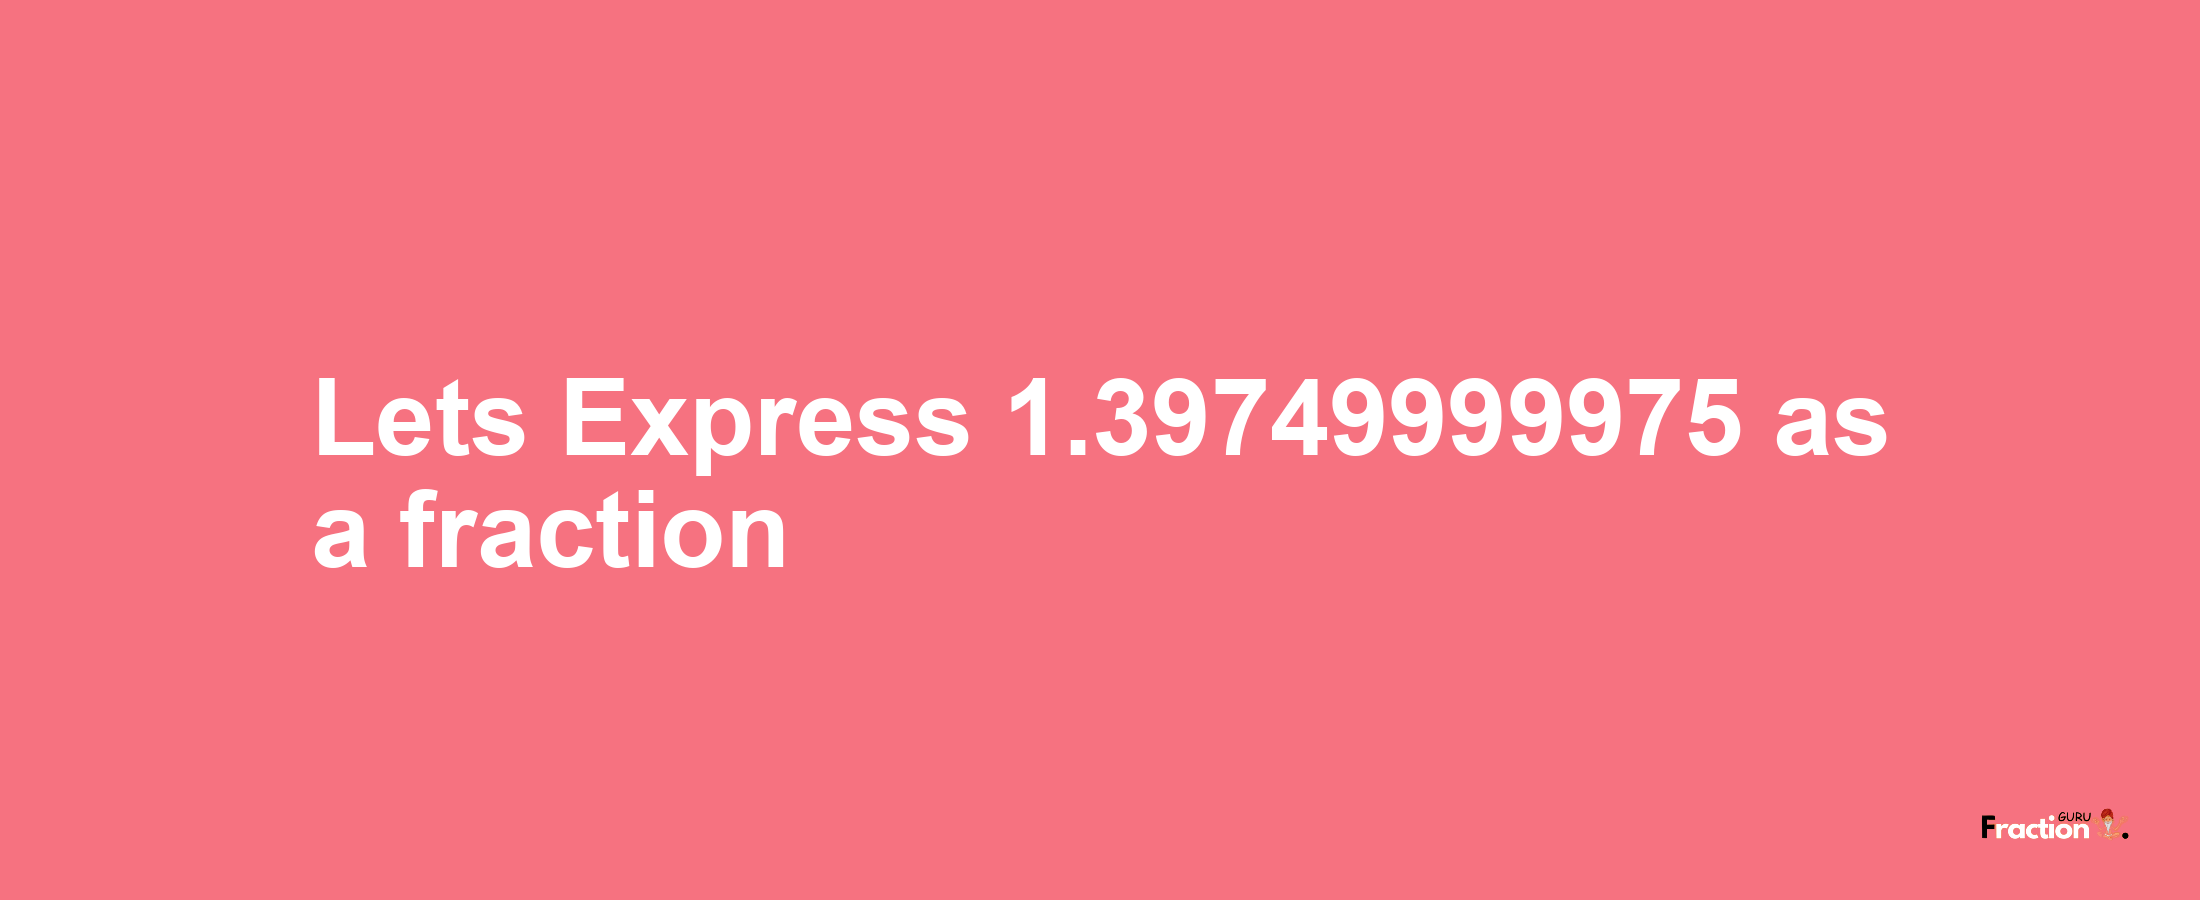 Lets Express 1.39749999975 as afraction